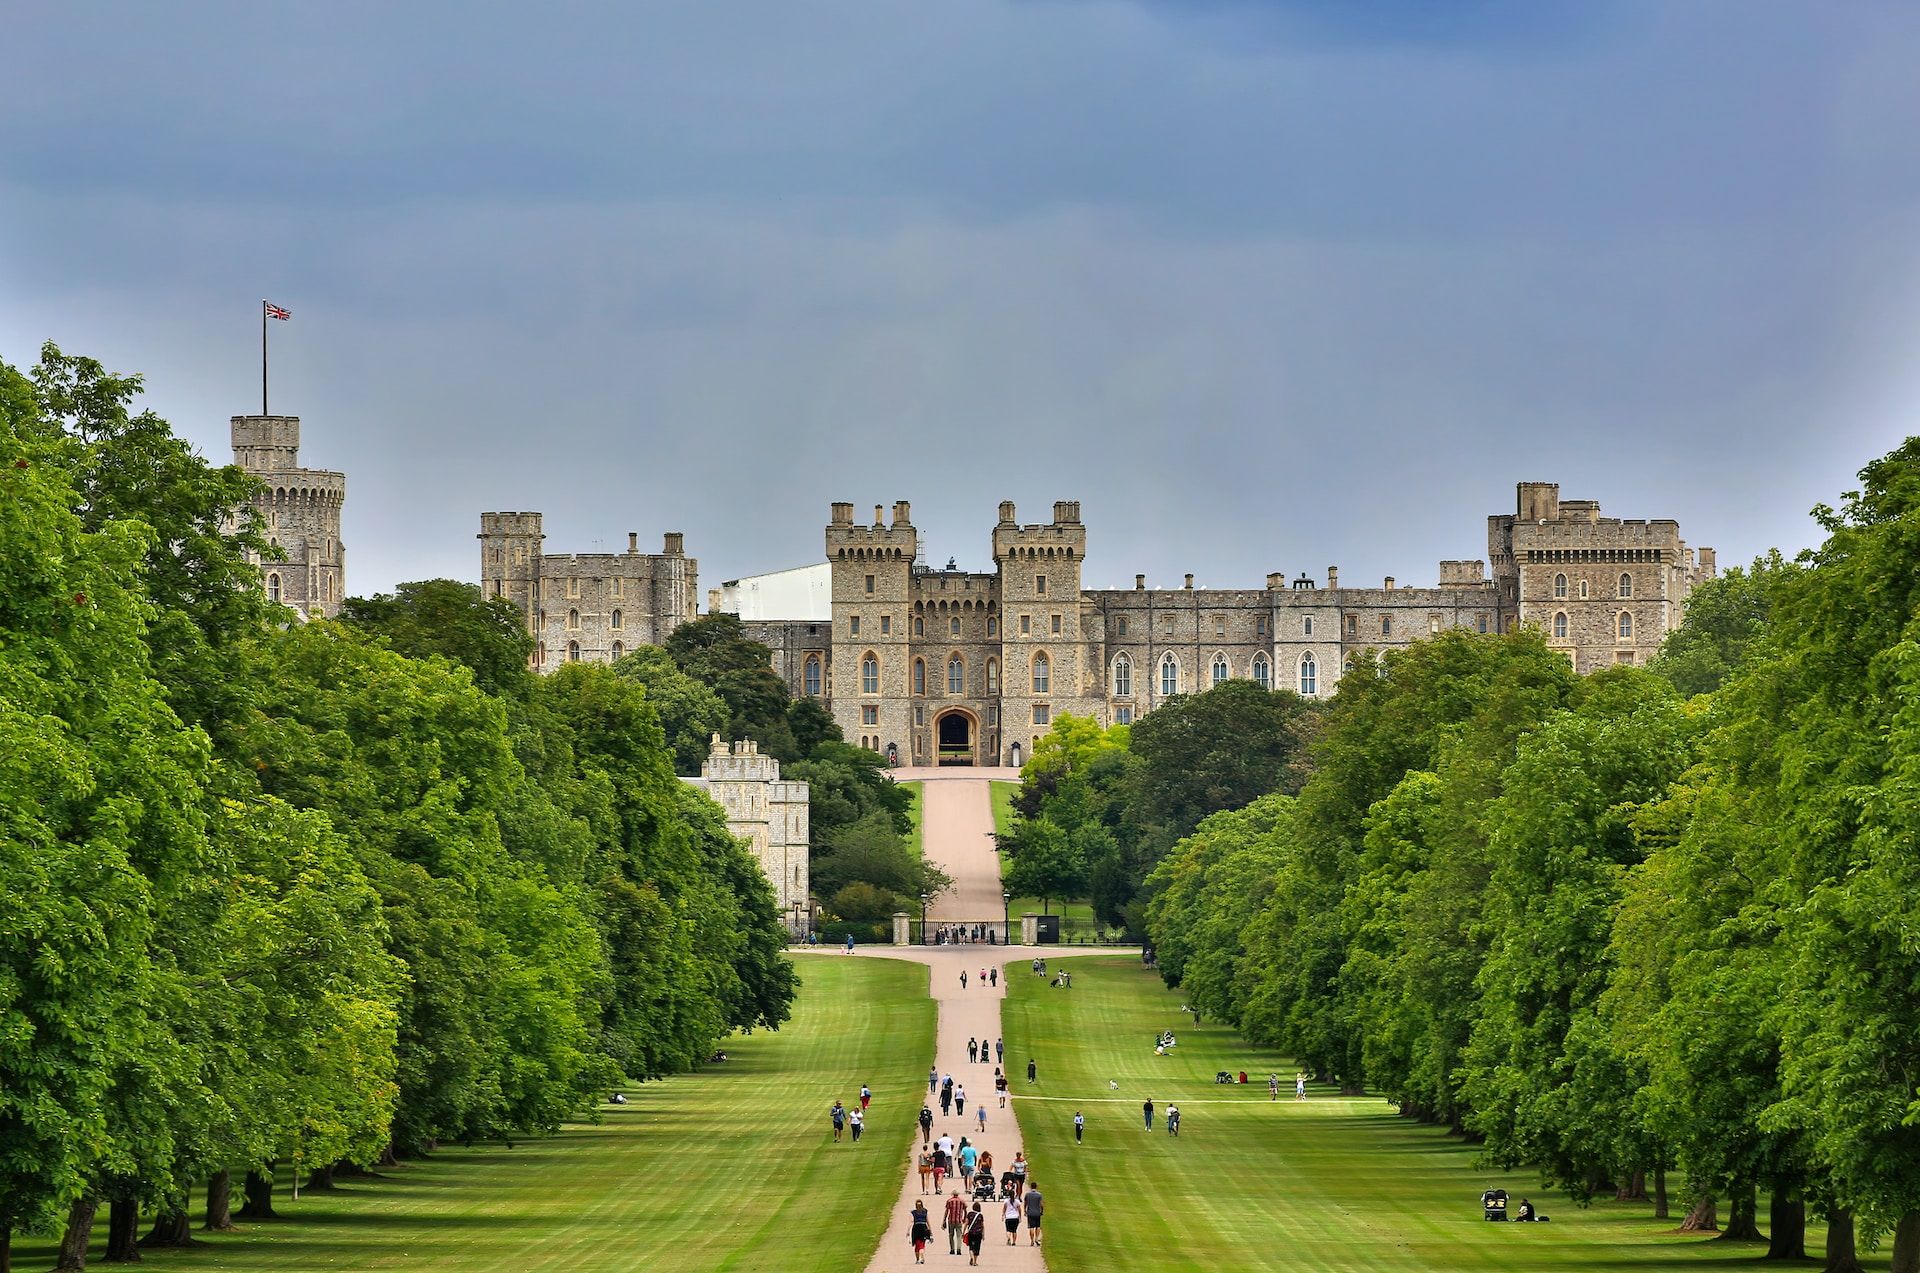 View of Windsor Castle in England